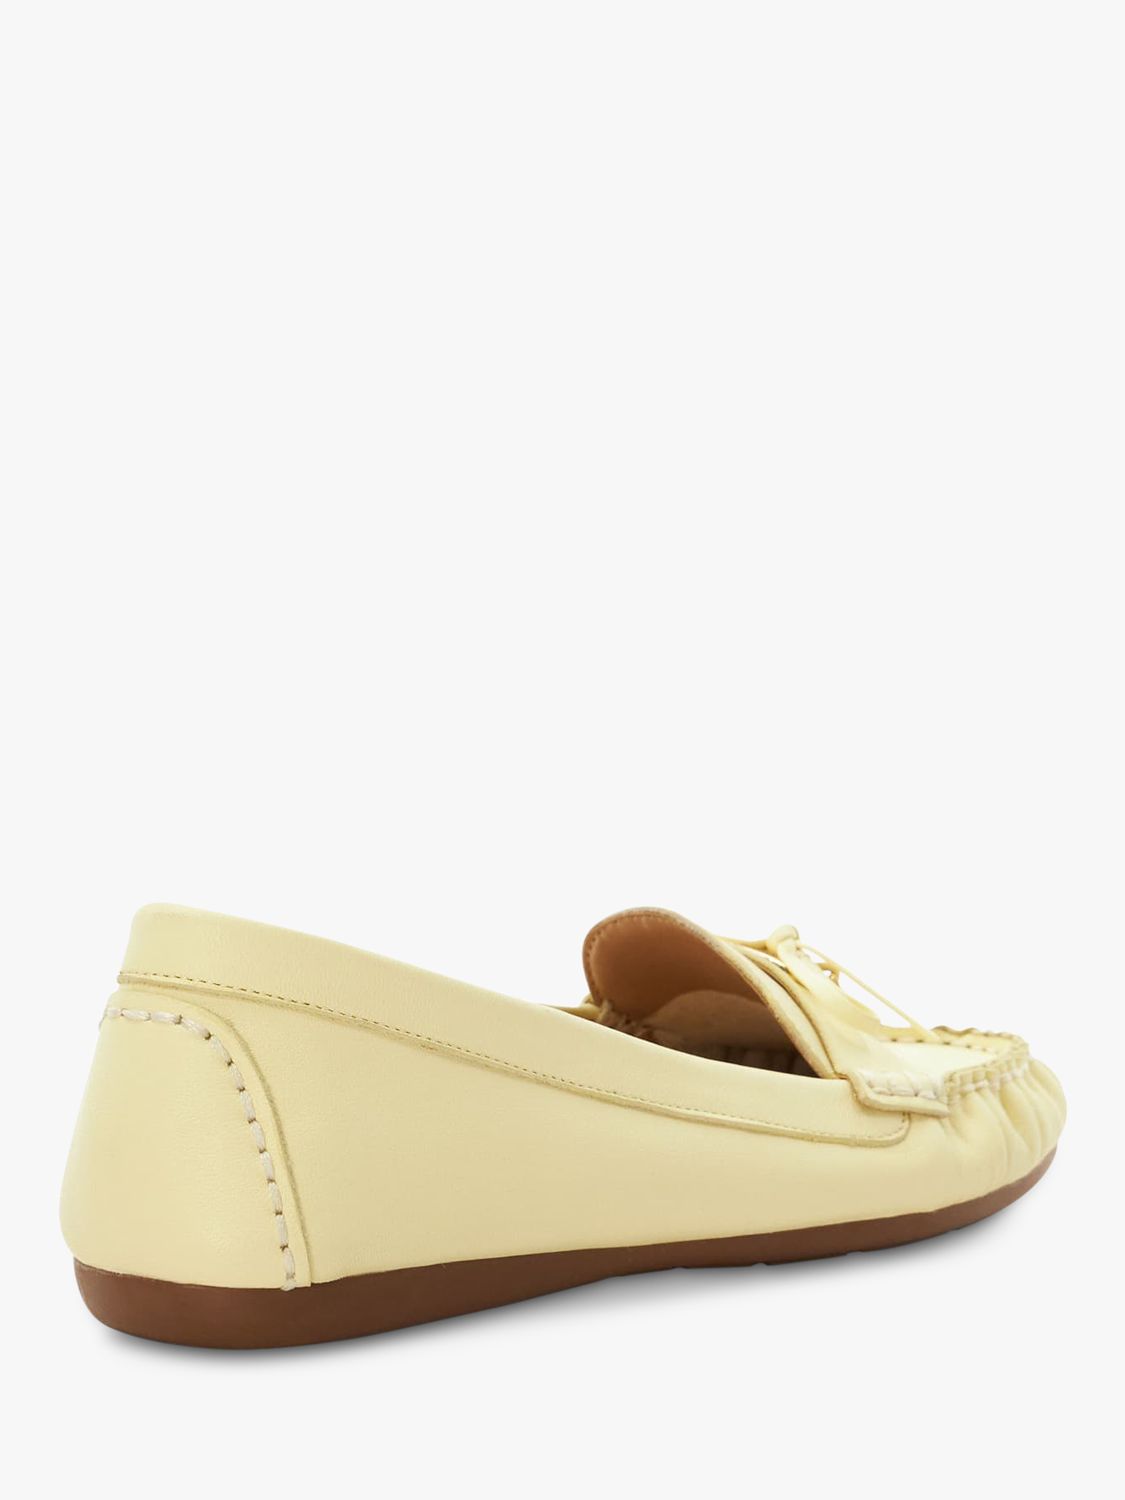 Buy Dune Grovers Leather Bow Detail Driving Loafers Online at johnlewis.com